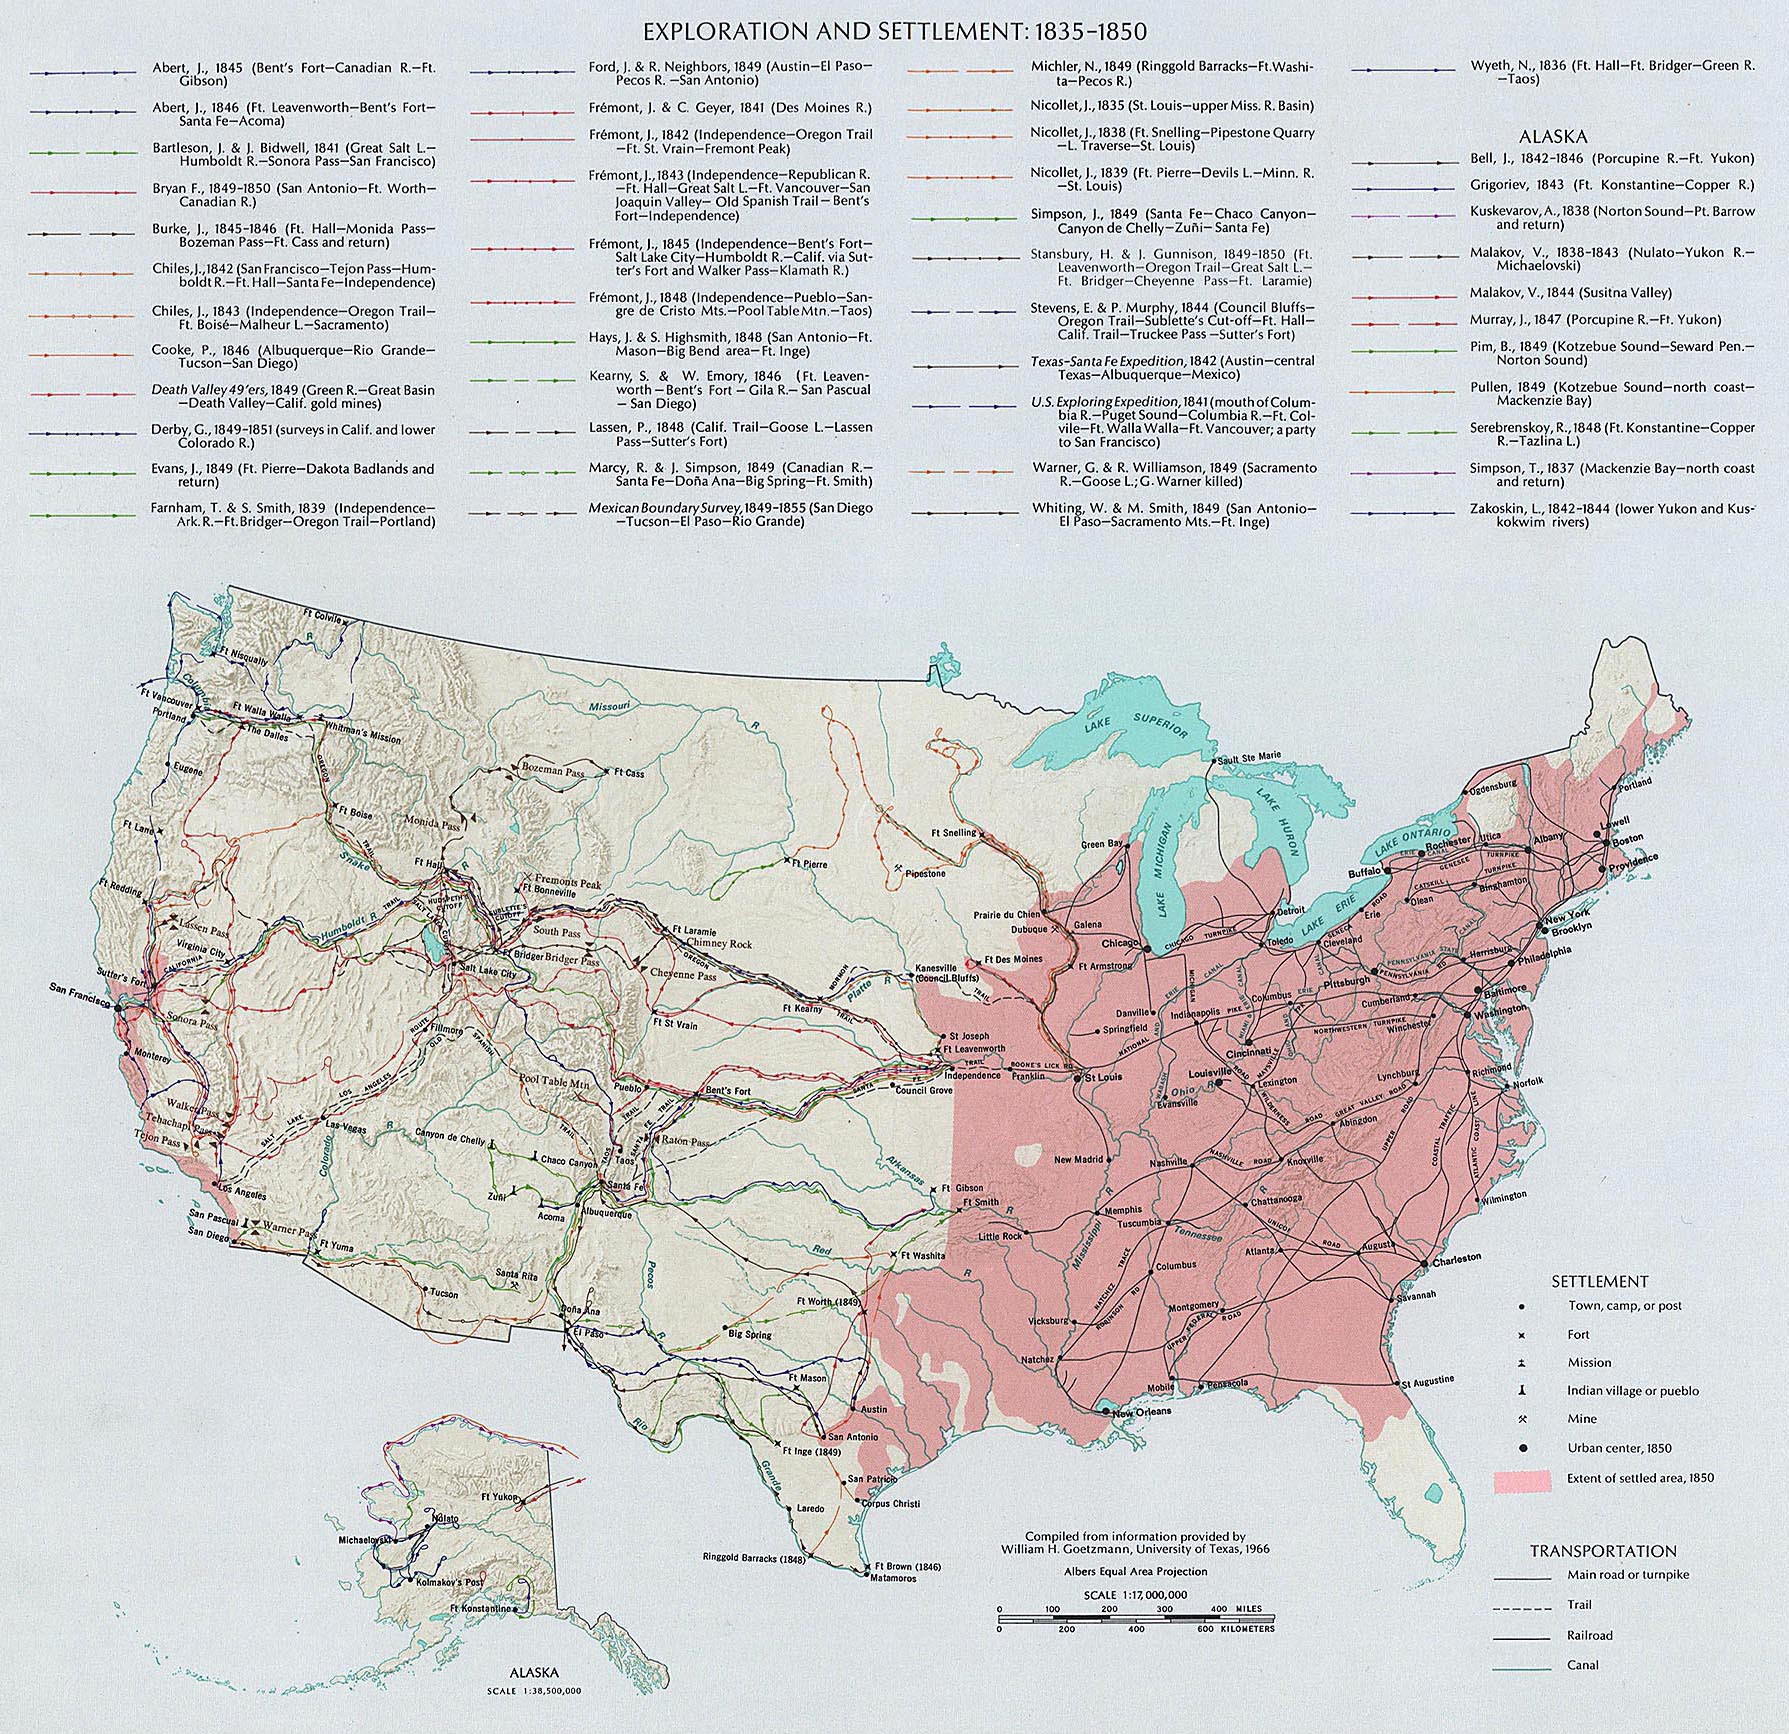 Routes of exploration and westward expansion, 1835–1850